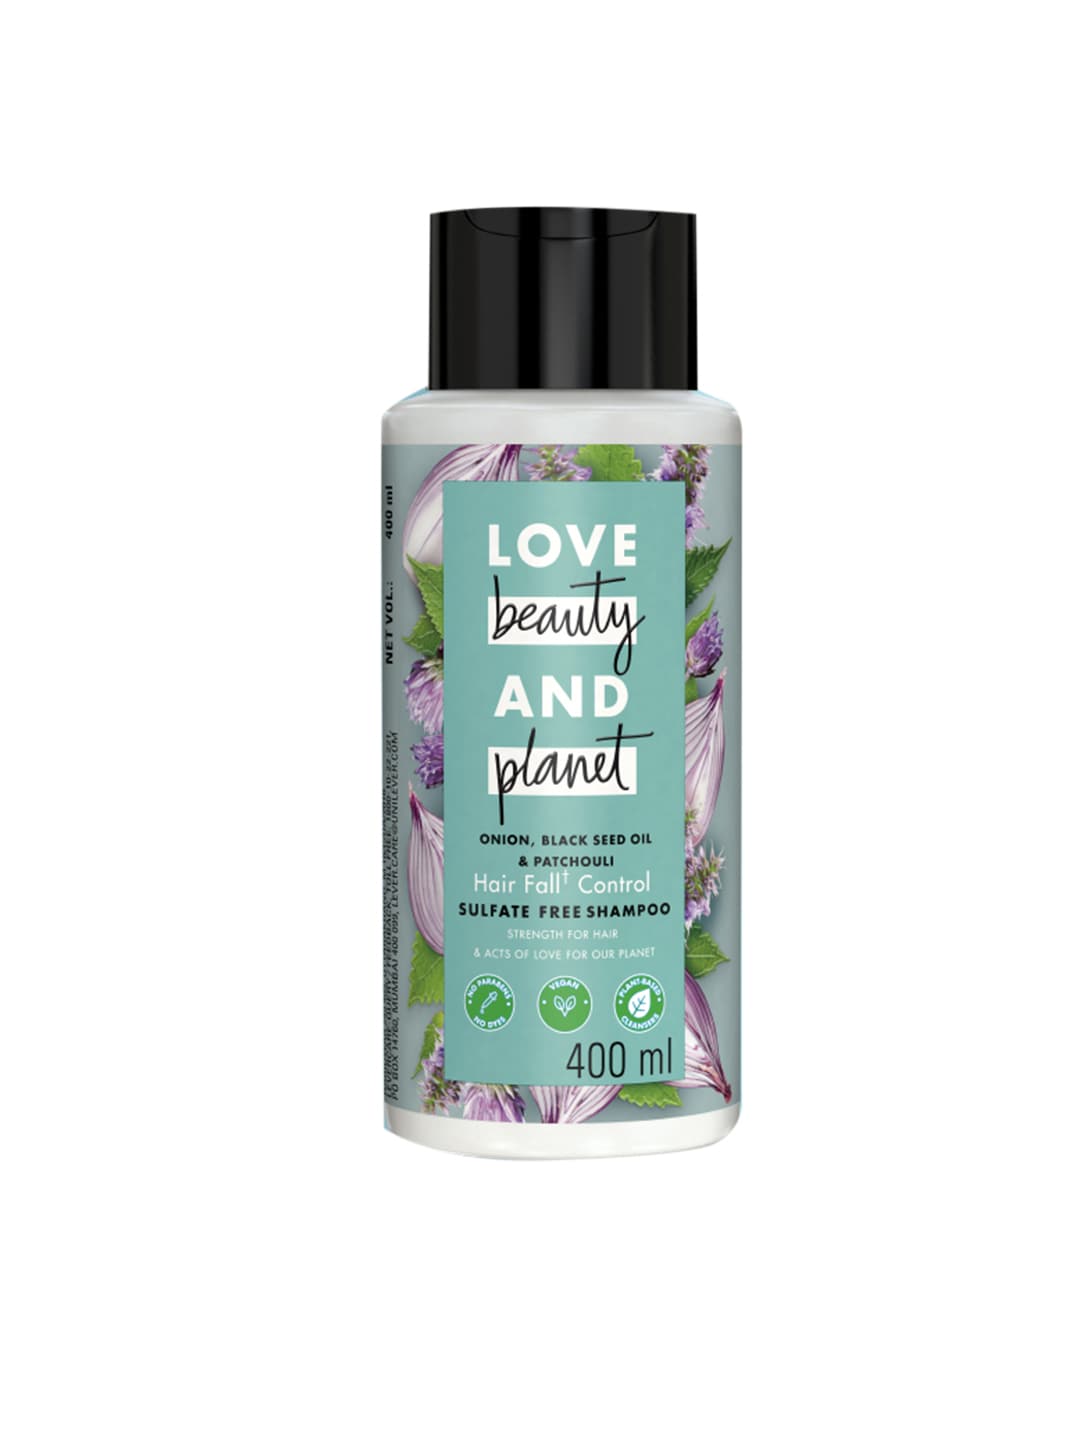 Love Beauty & Planet Onion Blackseed Oil & Patchouli Sulfate Free Shampoo 400 ml Price in India